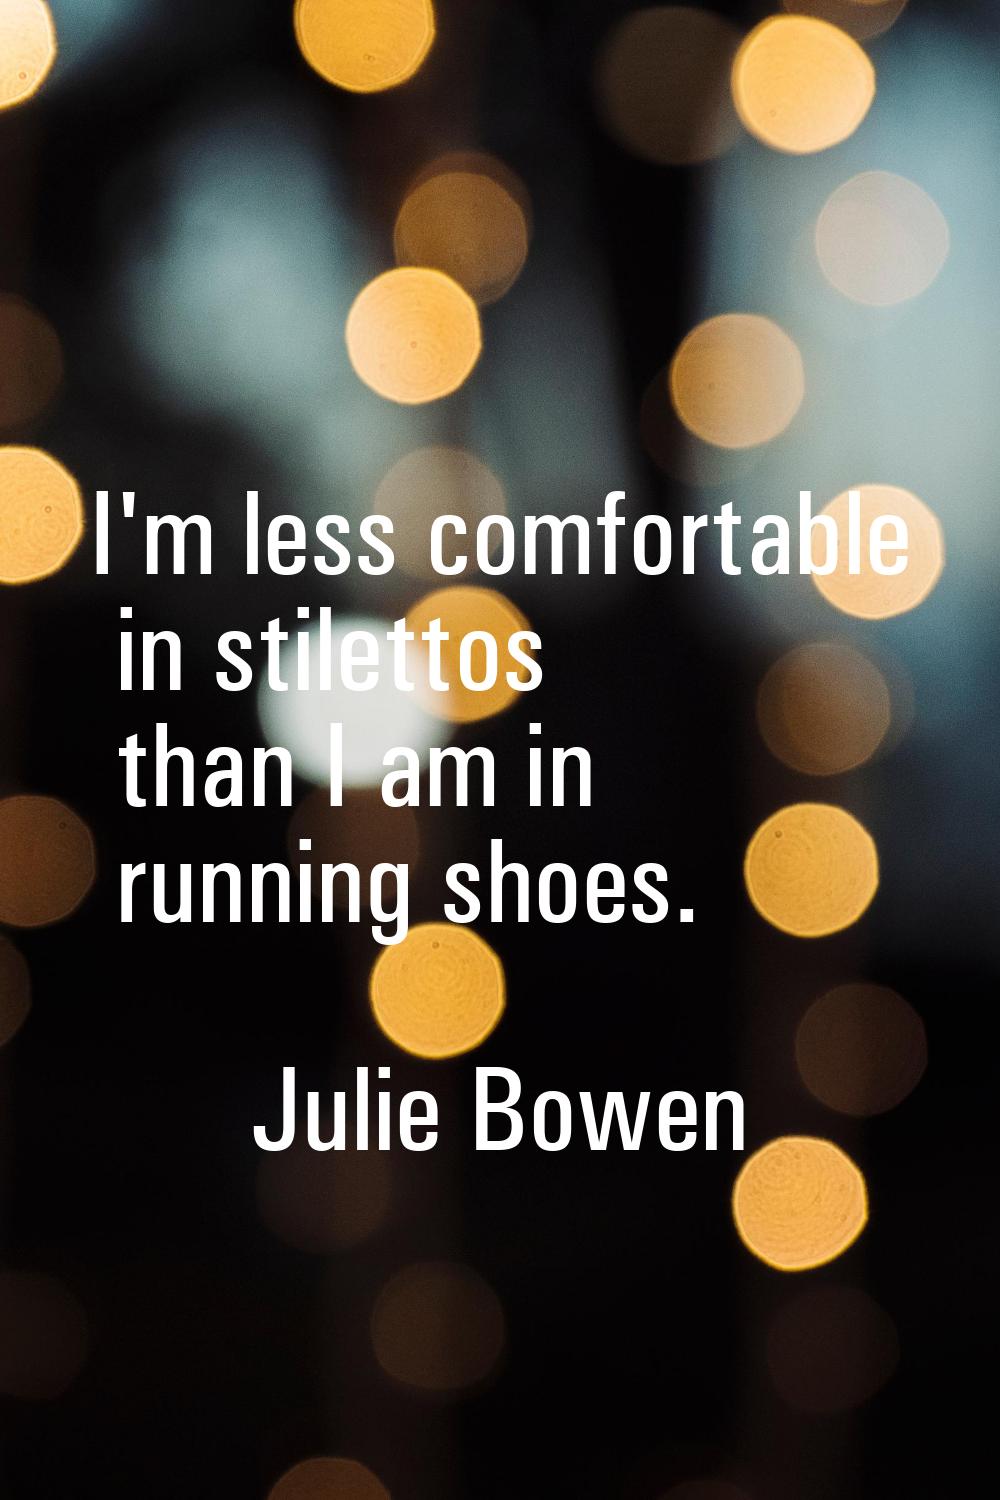 I'm less comfortable in stilettos than I am in running shoes.